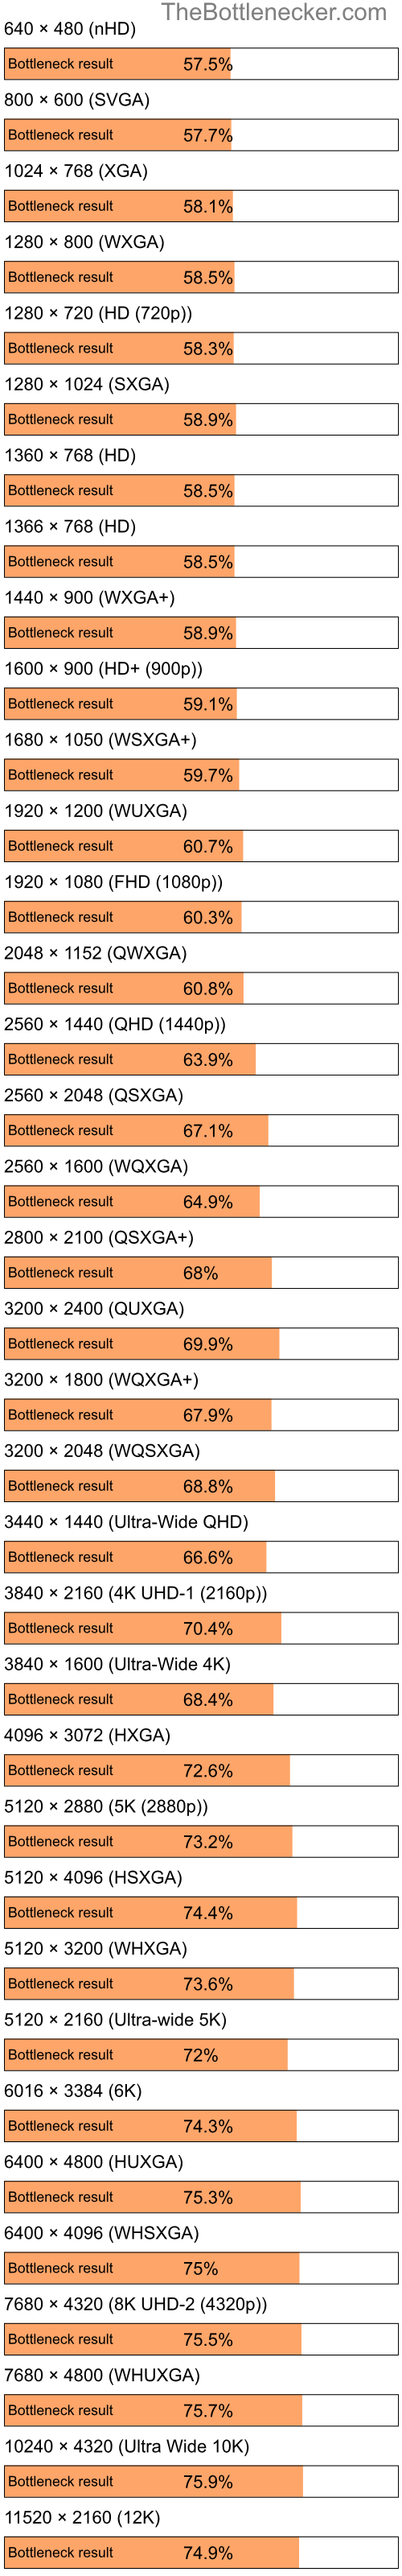 Bottleneck results by resolution for Intel Celeron and AMD Mobility Radeon X700 in Processor Intense Tasks